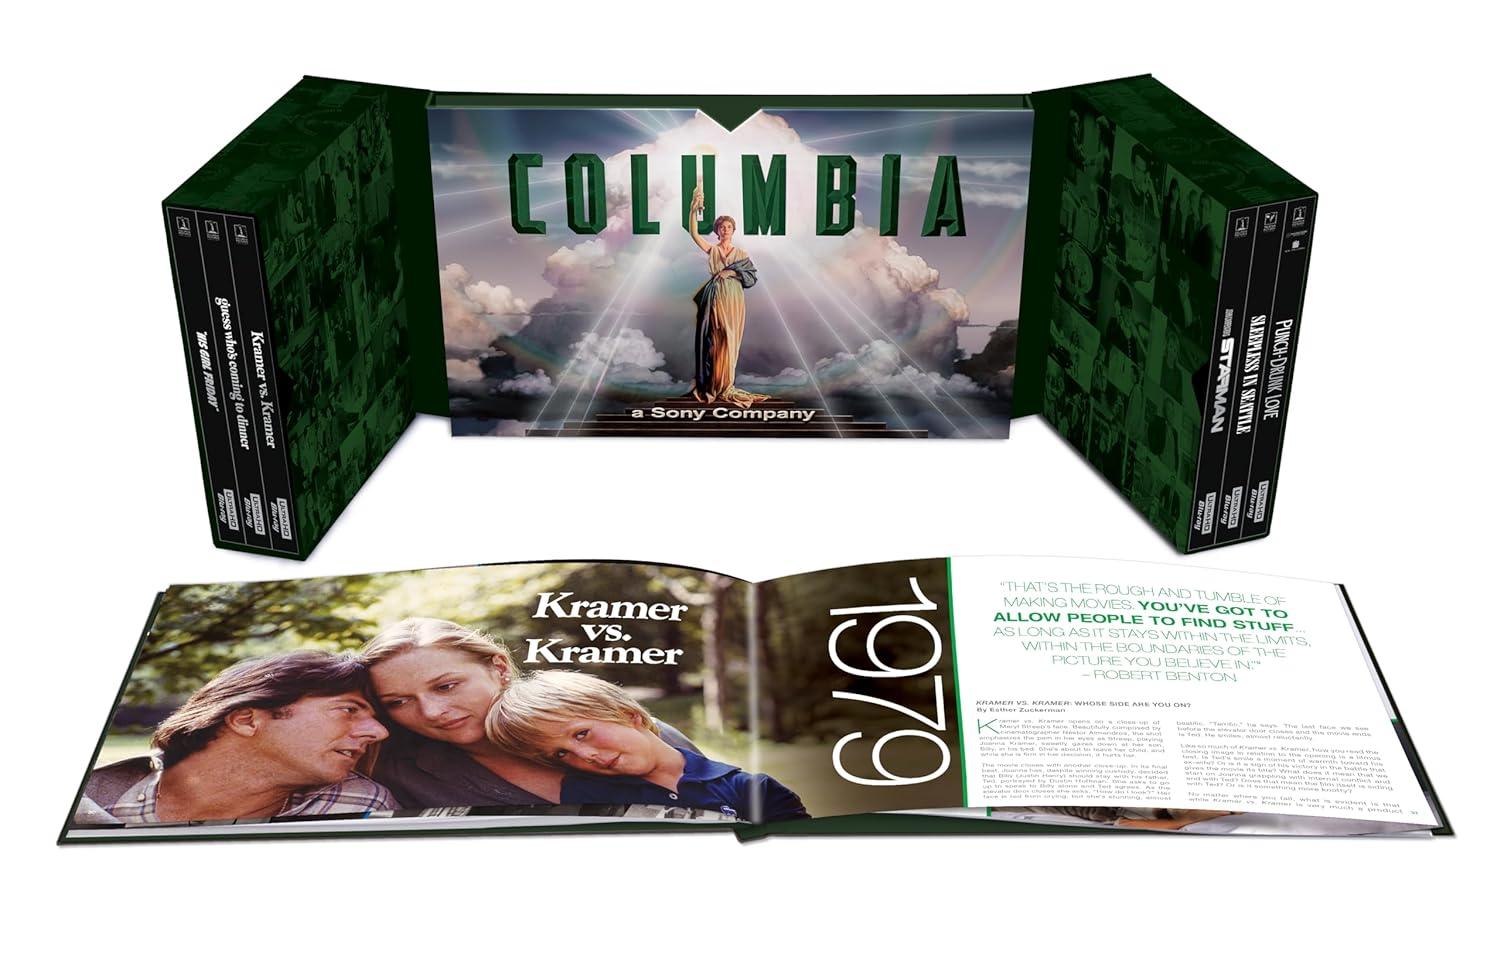 Columbia Classics 4K Ultra HD Collection Volume 4 Blu-ray for $149 Shipped